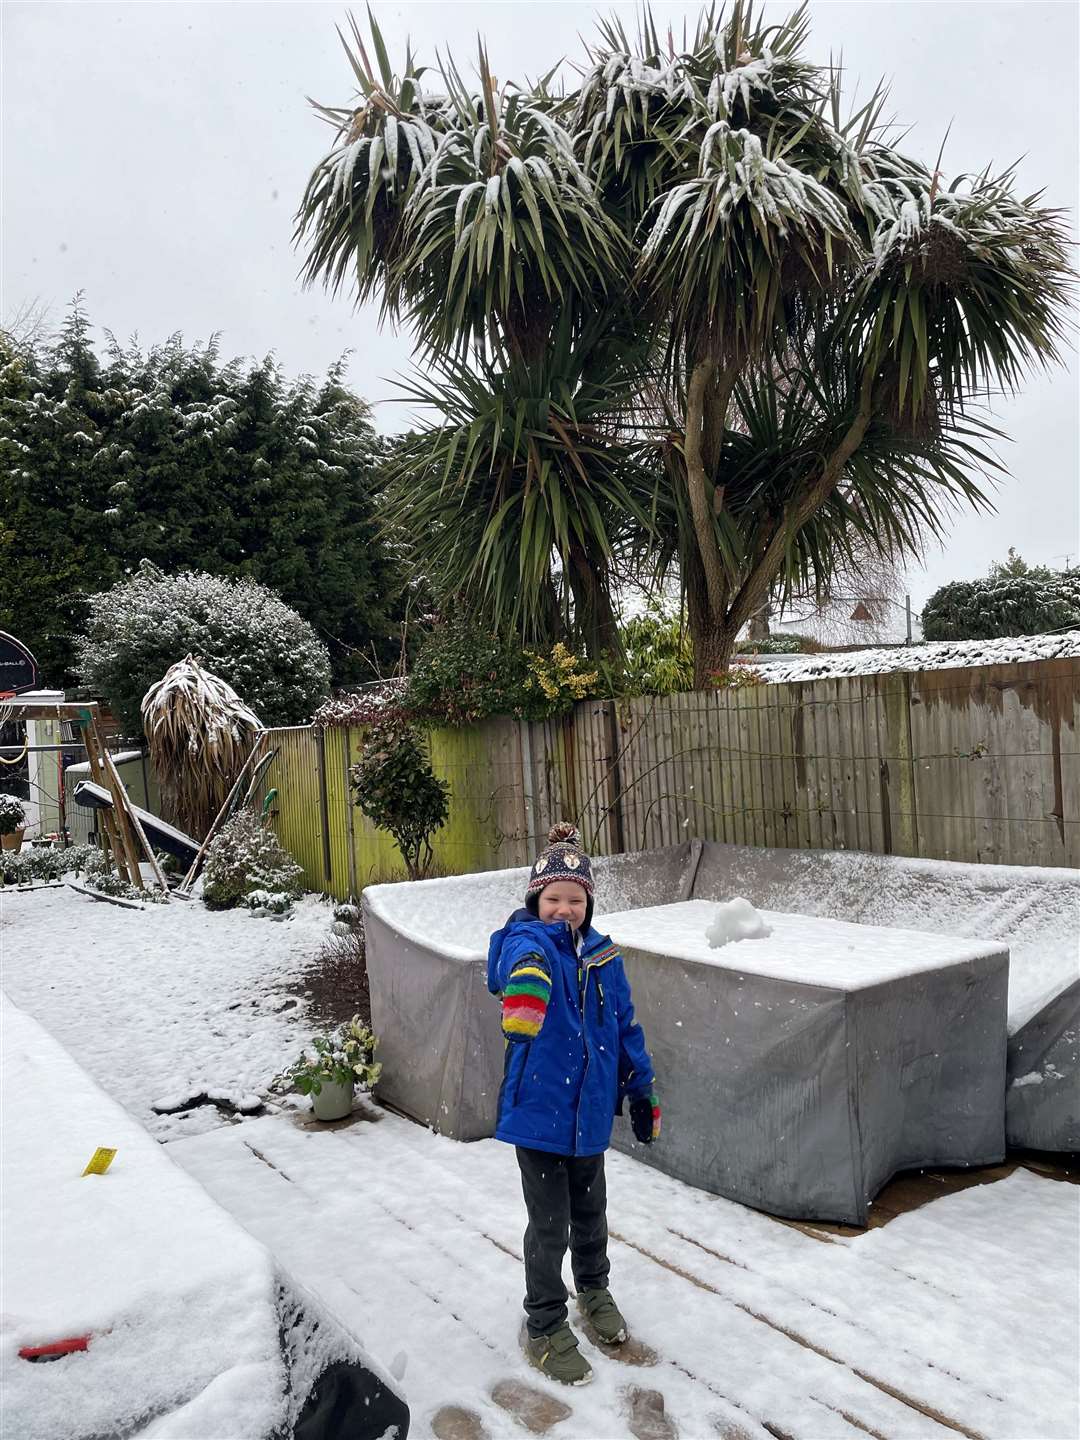 Five-year-old Harry Booth has fun in the snow in a garden in Horsham, West Sussex (Jane Kirby/PA)